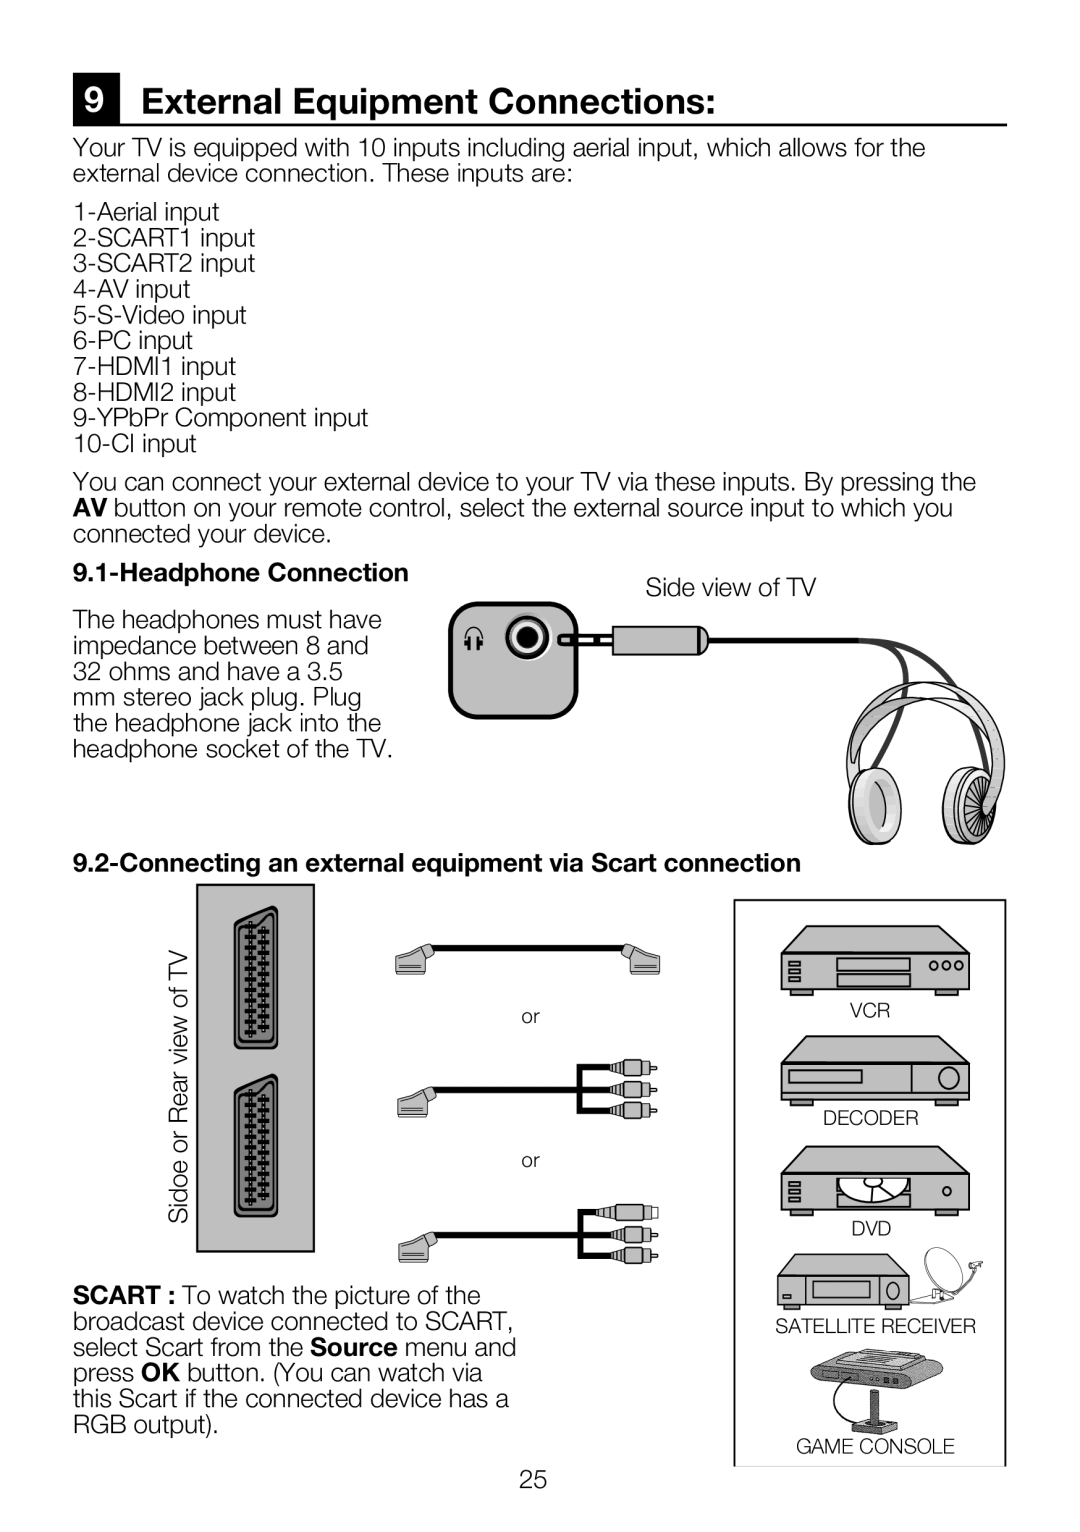 Beko 40WLU550FHID manual External Equipment Connections, Headphone Connection 